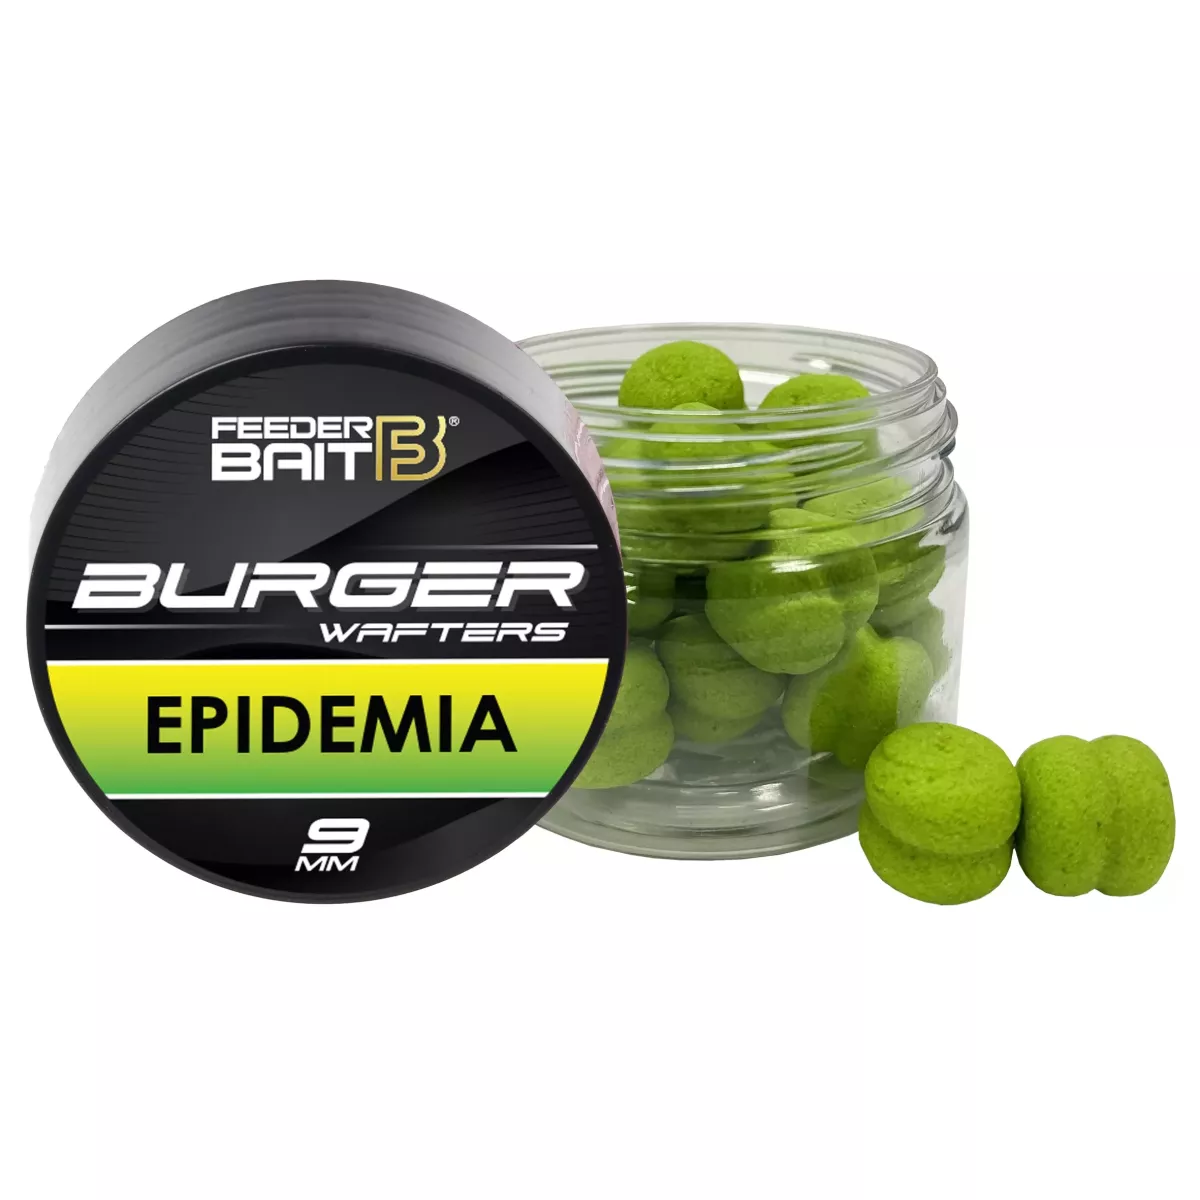 FB37-1 Feeder Bait Burger Wafters 9mm - Epidemia